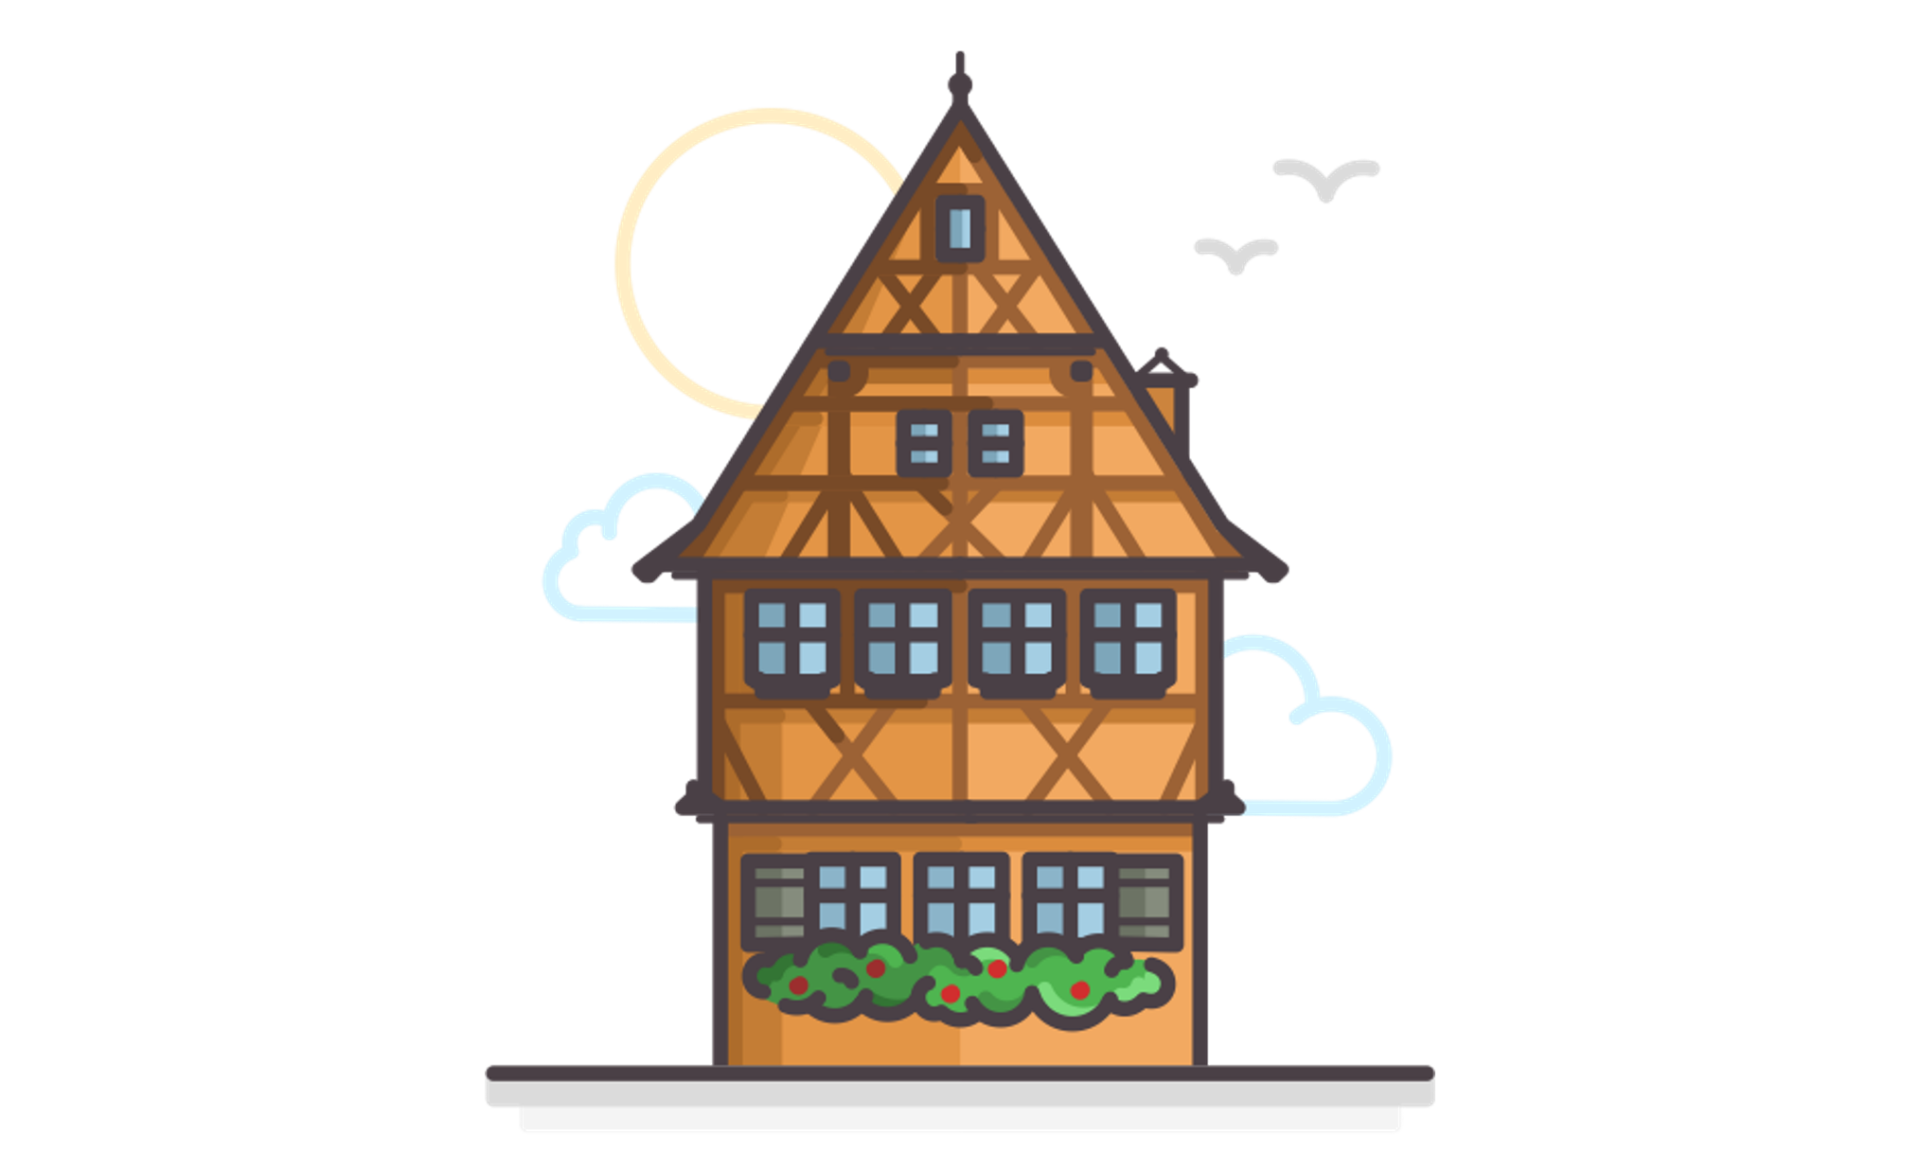 Icon of a German half-timbered building from Rothenburg ob der Tauber